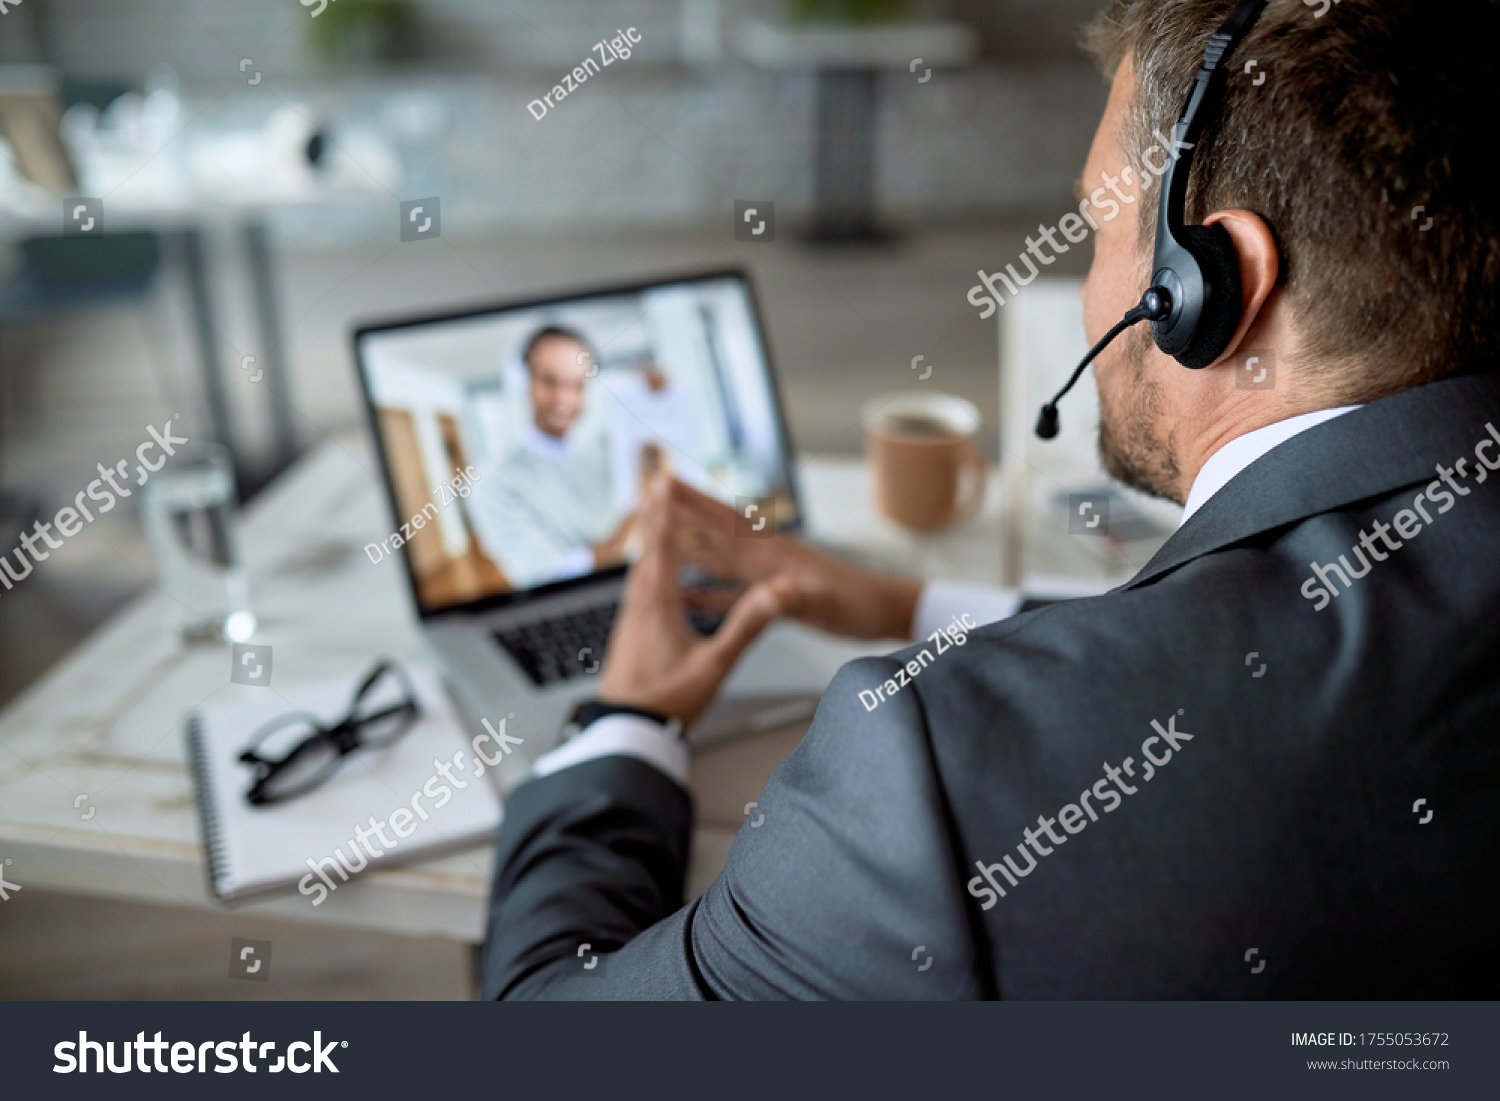 Close-up of entrepreneur using laptop while having online business meeting in the office.  #1755053672